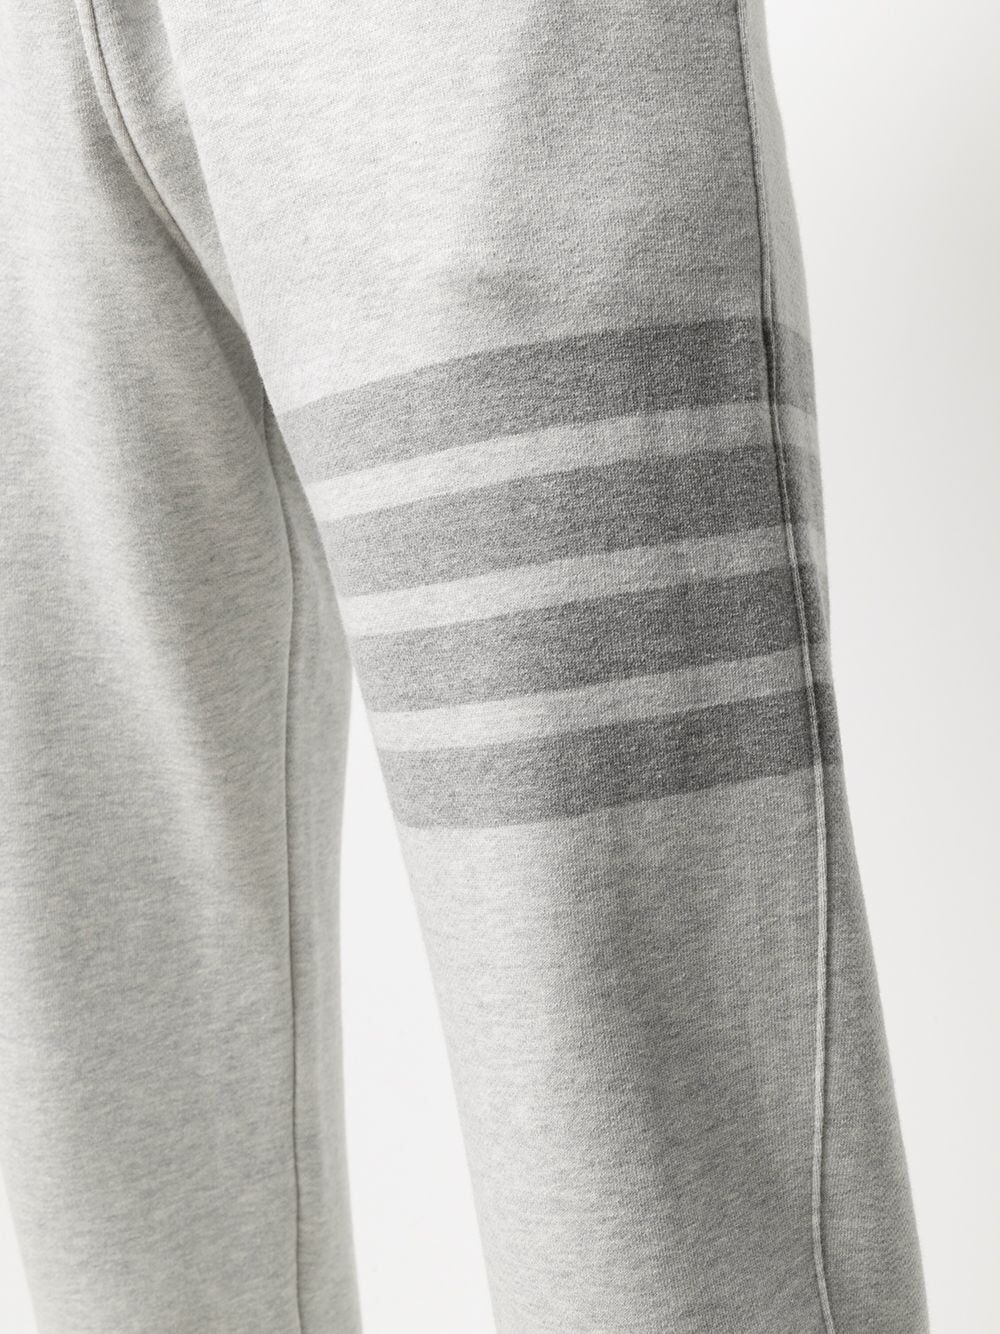 SWEATPANTS IN CLASSIC LOOPBACK WITH ENGINEERED 4 BAR STRIPE - 5